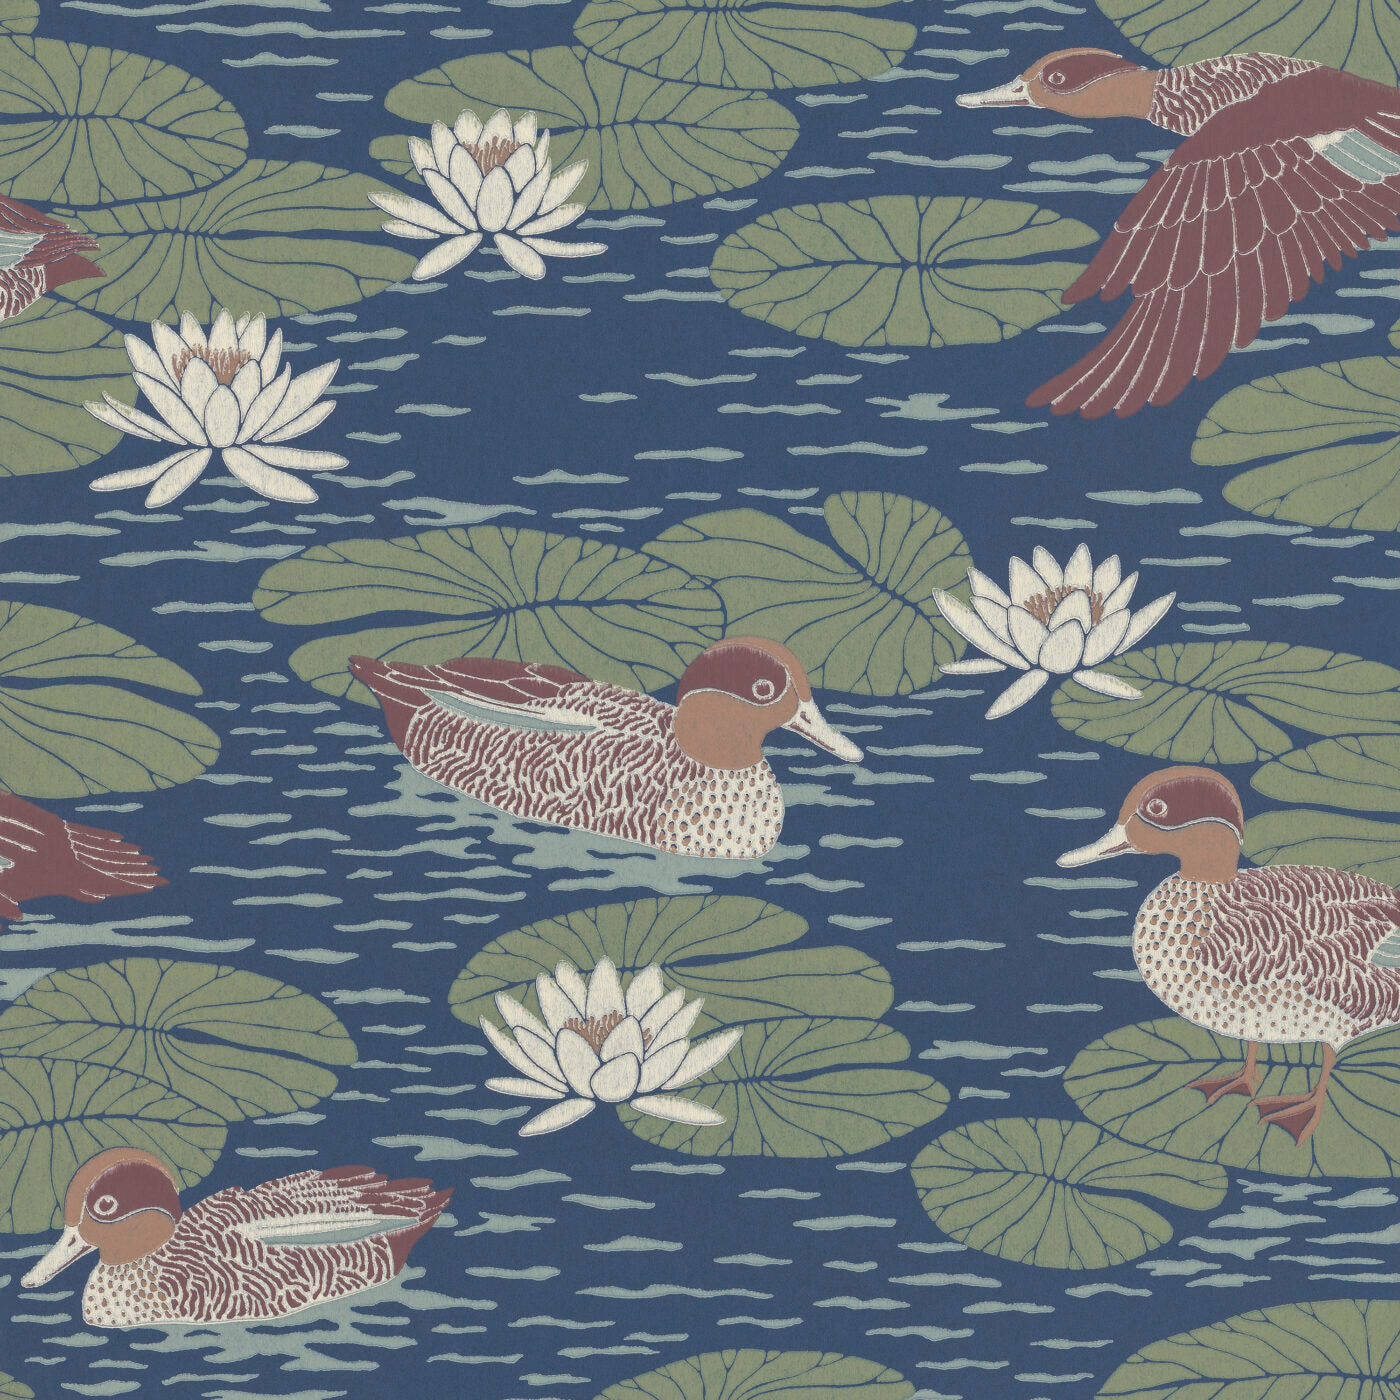 Wallpaper with beautifully patterned ducks camouflage with the water lily pads in a luscious design that gives any room a snug yet cool atmosphere.